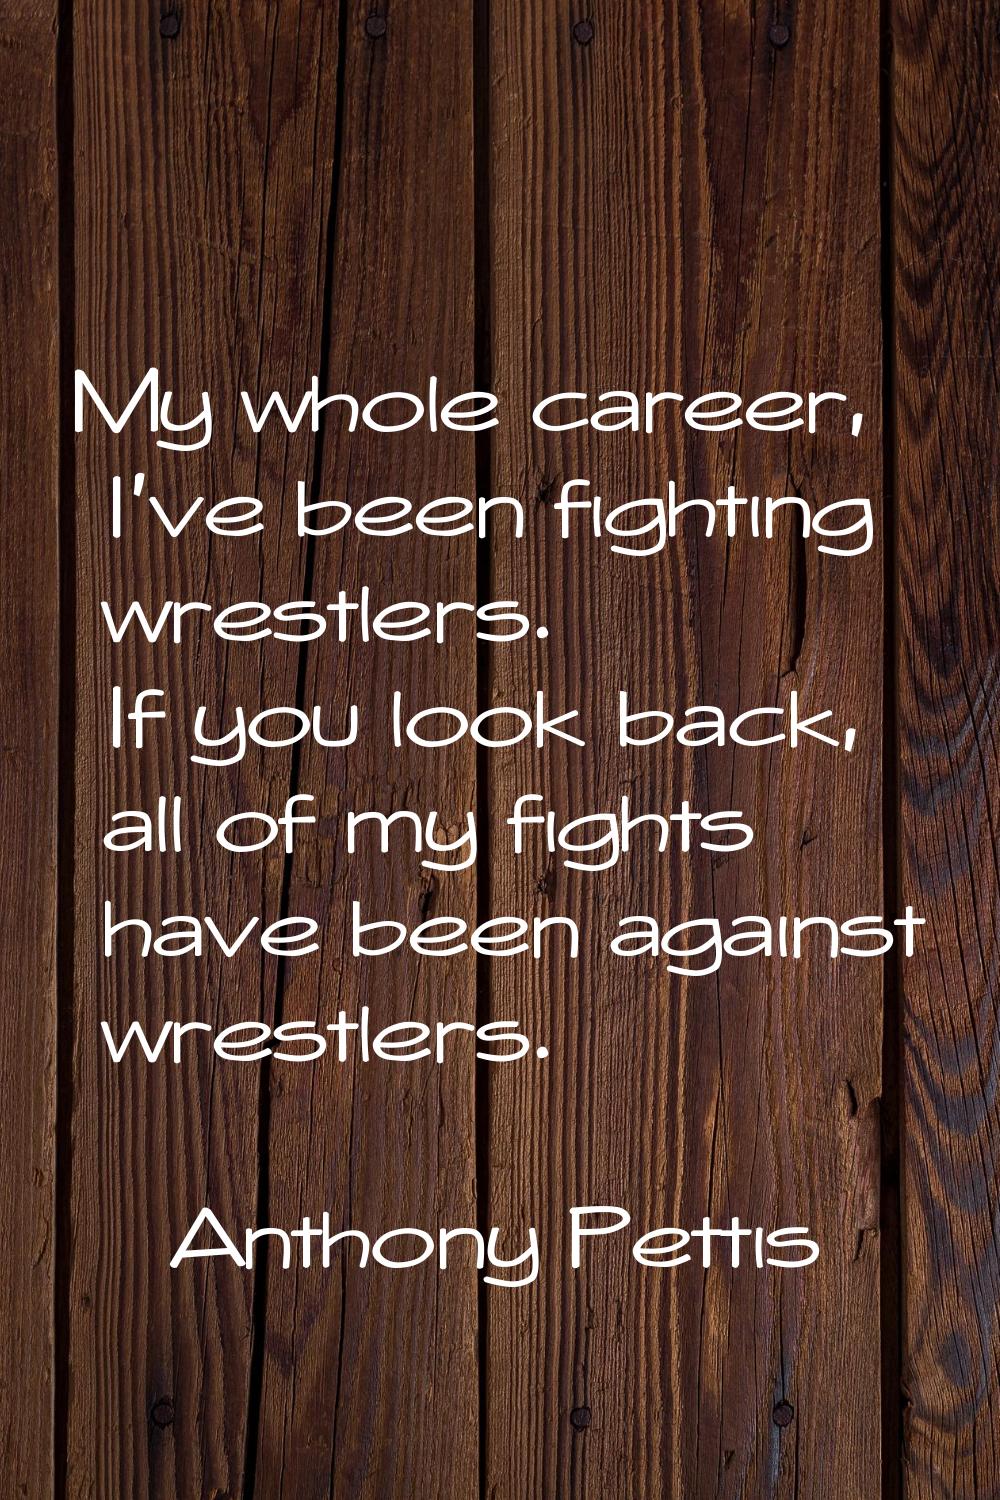 My whole career, I've been fighting wrestlers. If you look back, all of my fights have been against